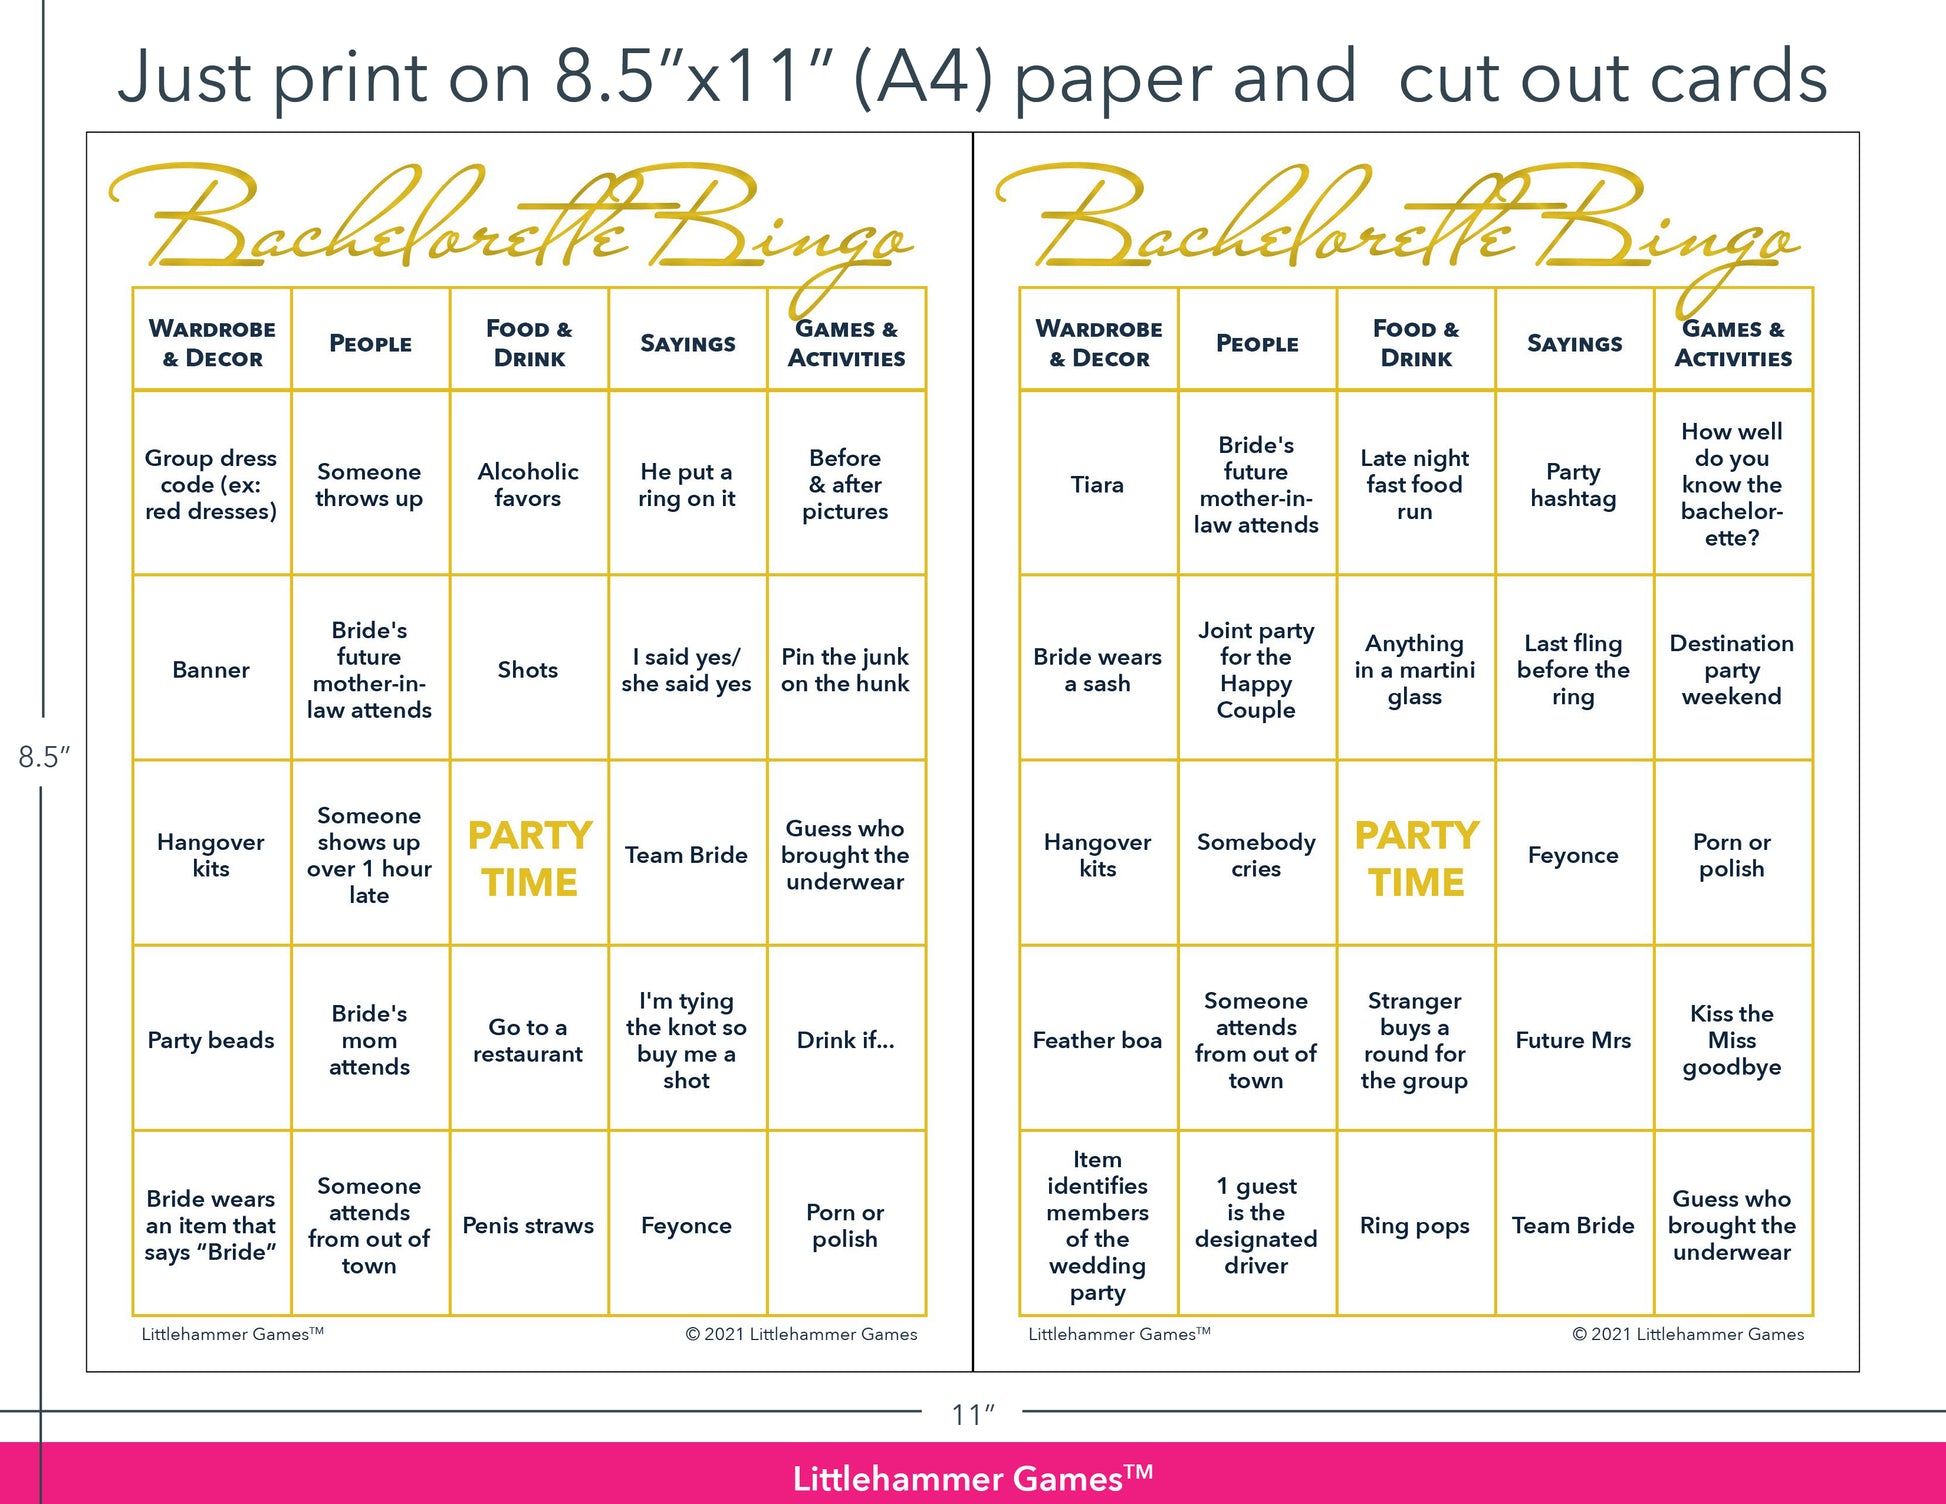 Gold and white Bachelorette Bingo game cards with printing instructions